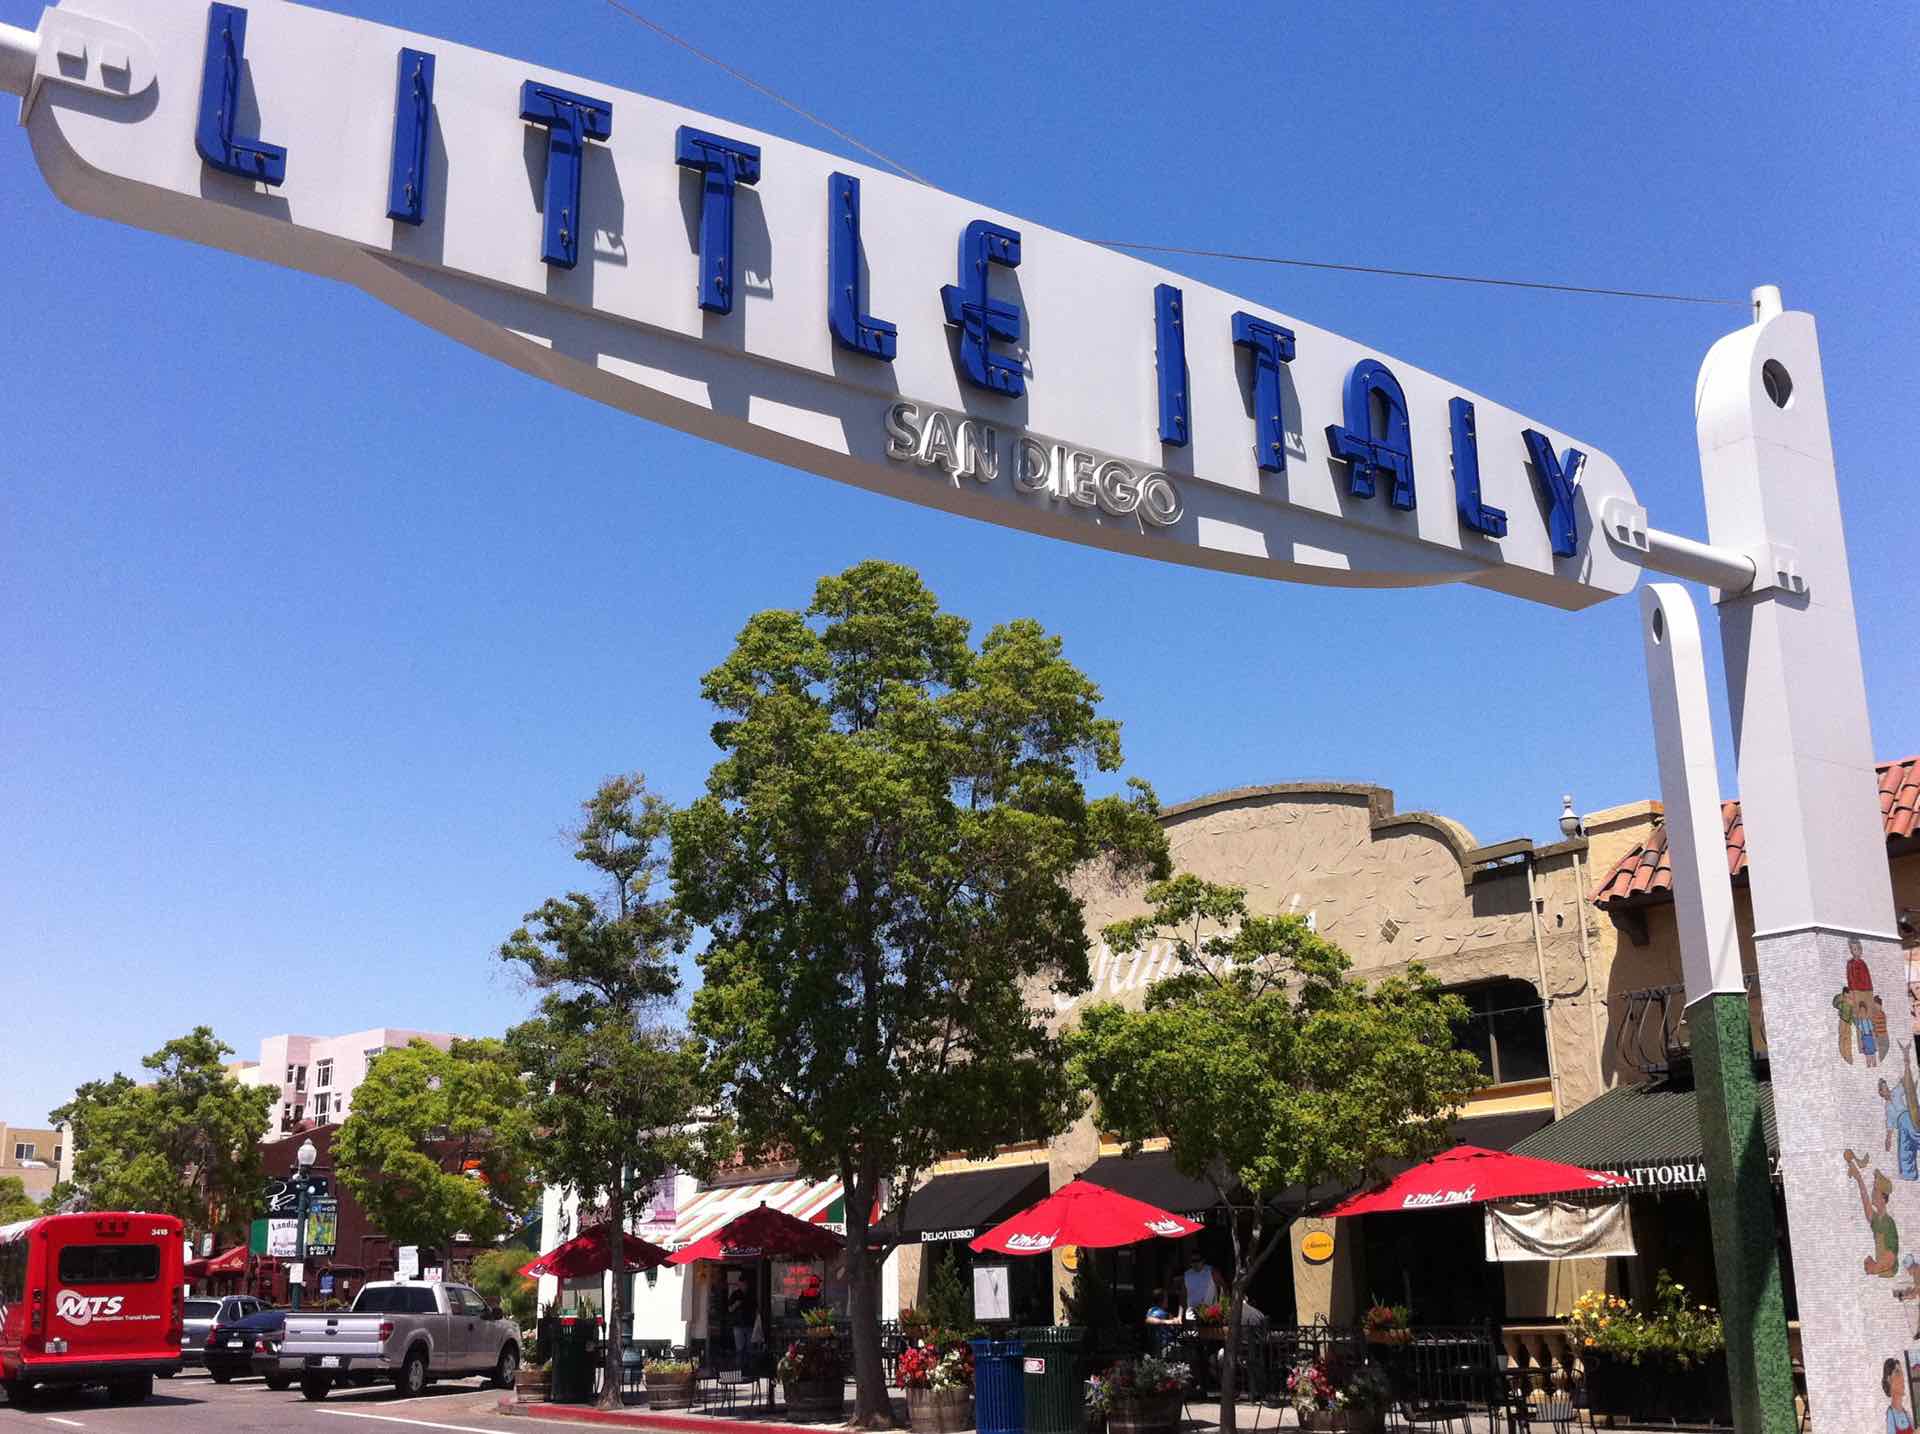 'Little Italy' Sign in Downtown San Diego